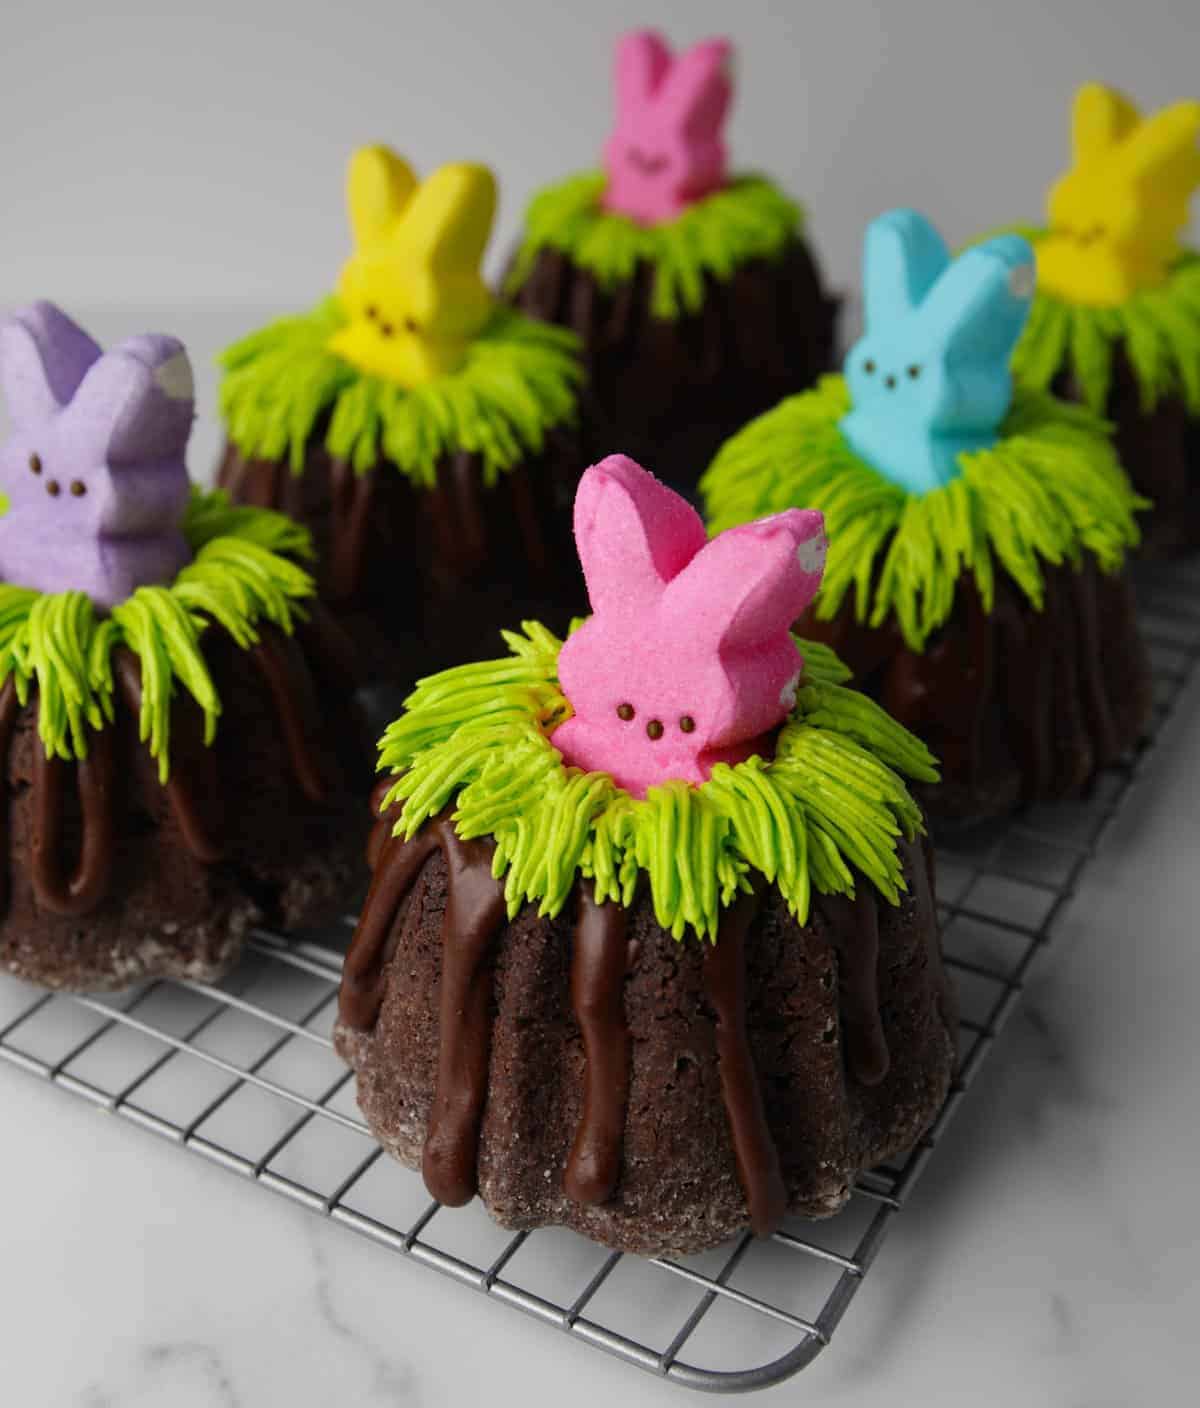 Six completed mini bundt cakes with chocolate drizzle, green frosting grass and Peep on top.